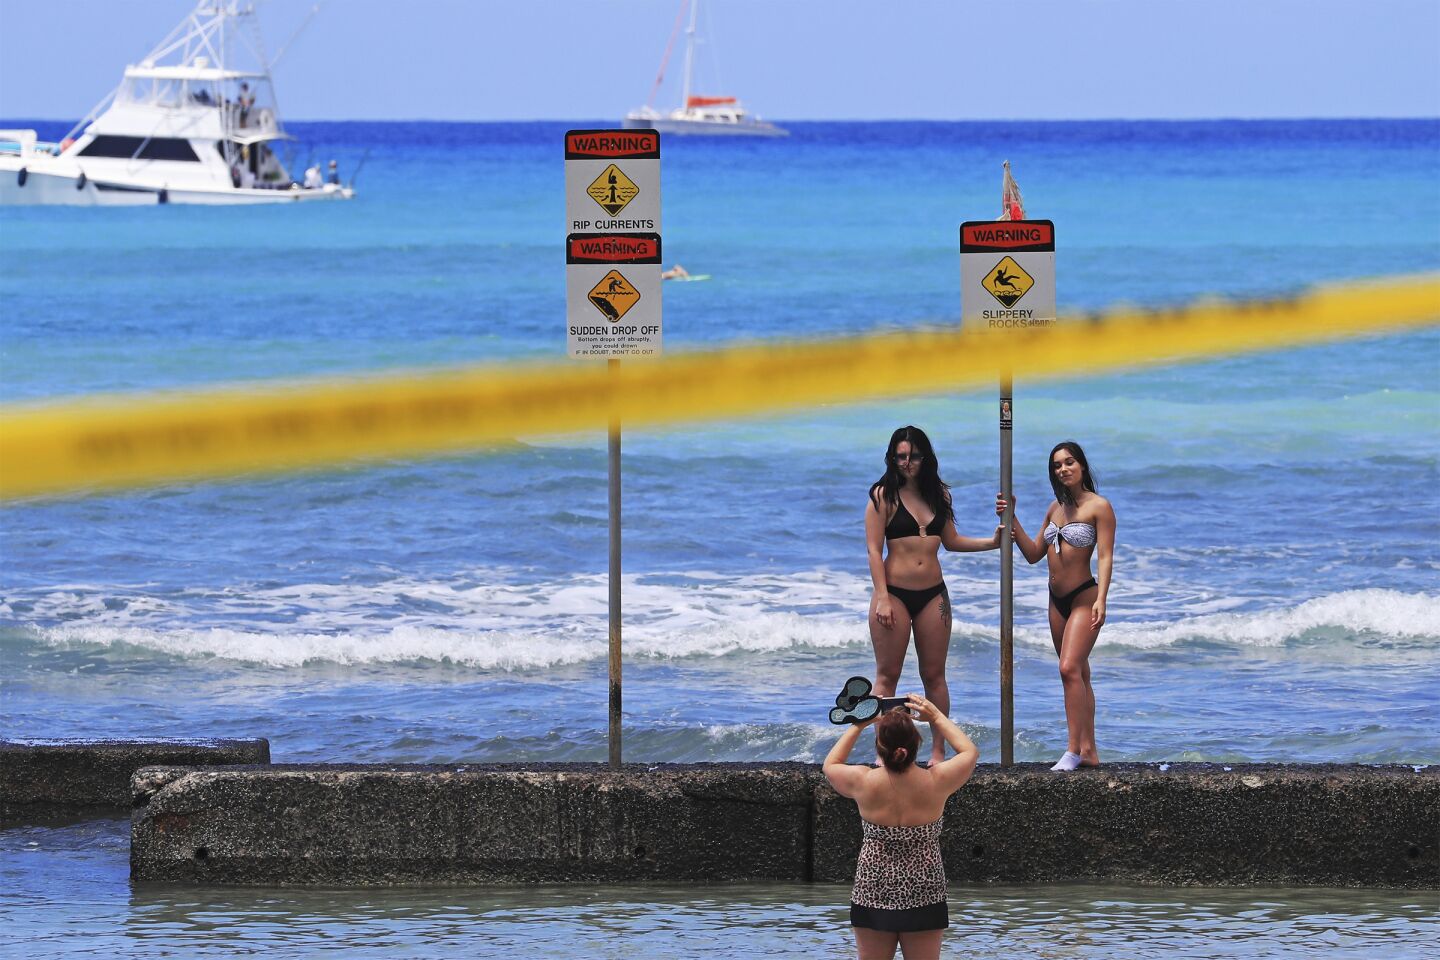 U.S.: Beachgoers take pictures on a sea wall in Honolulu. Honolulu has closed all public parks and recreation areas.